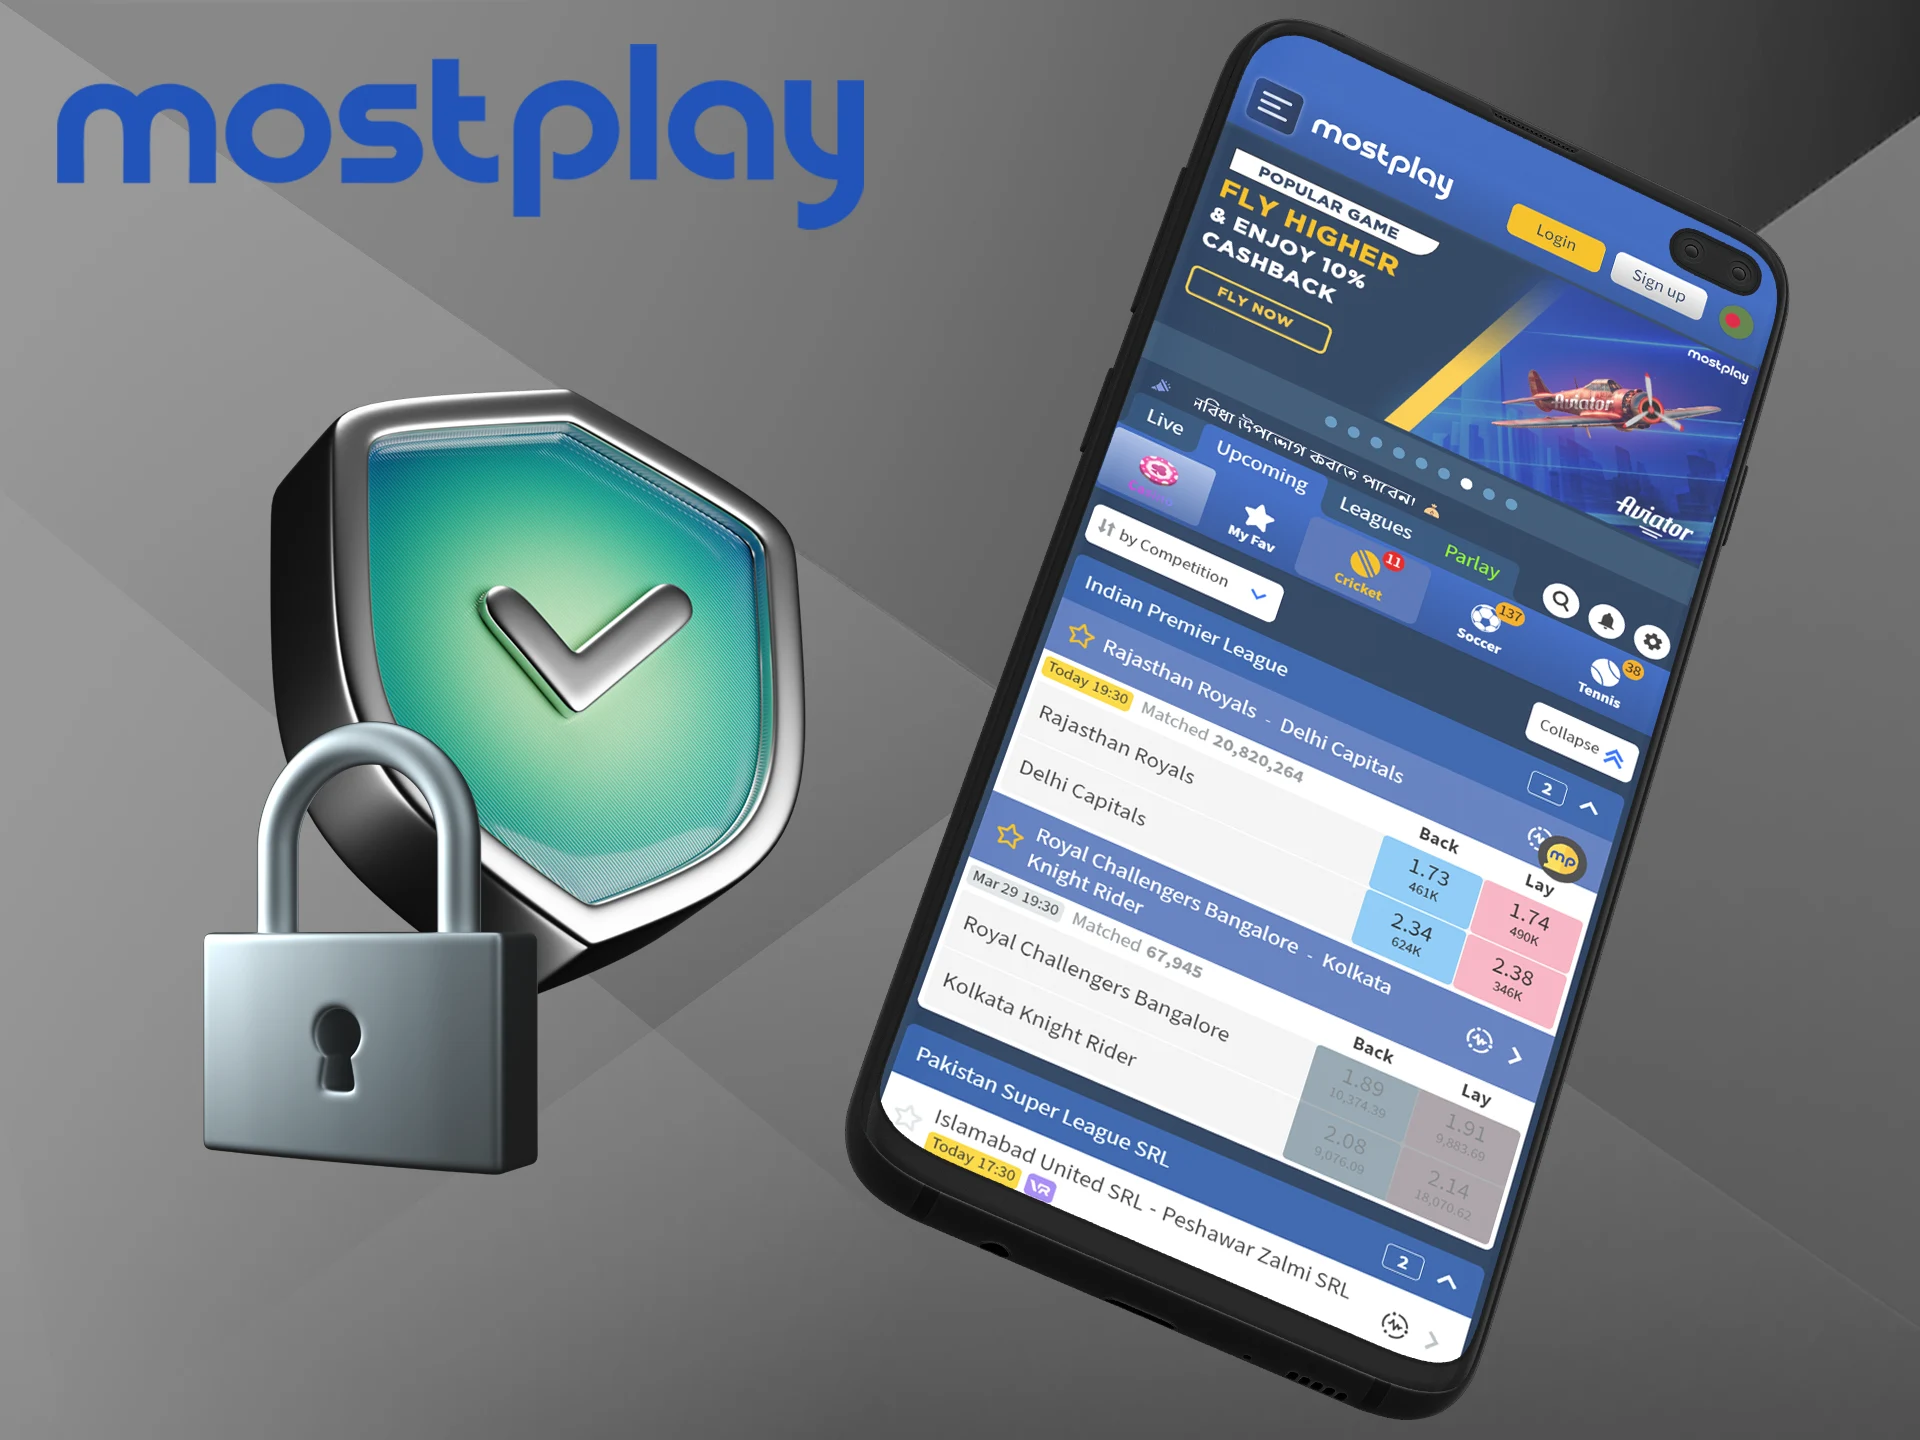 Users of the Mostplay platform can be assured of its legality and safety.